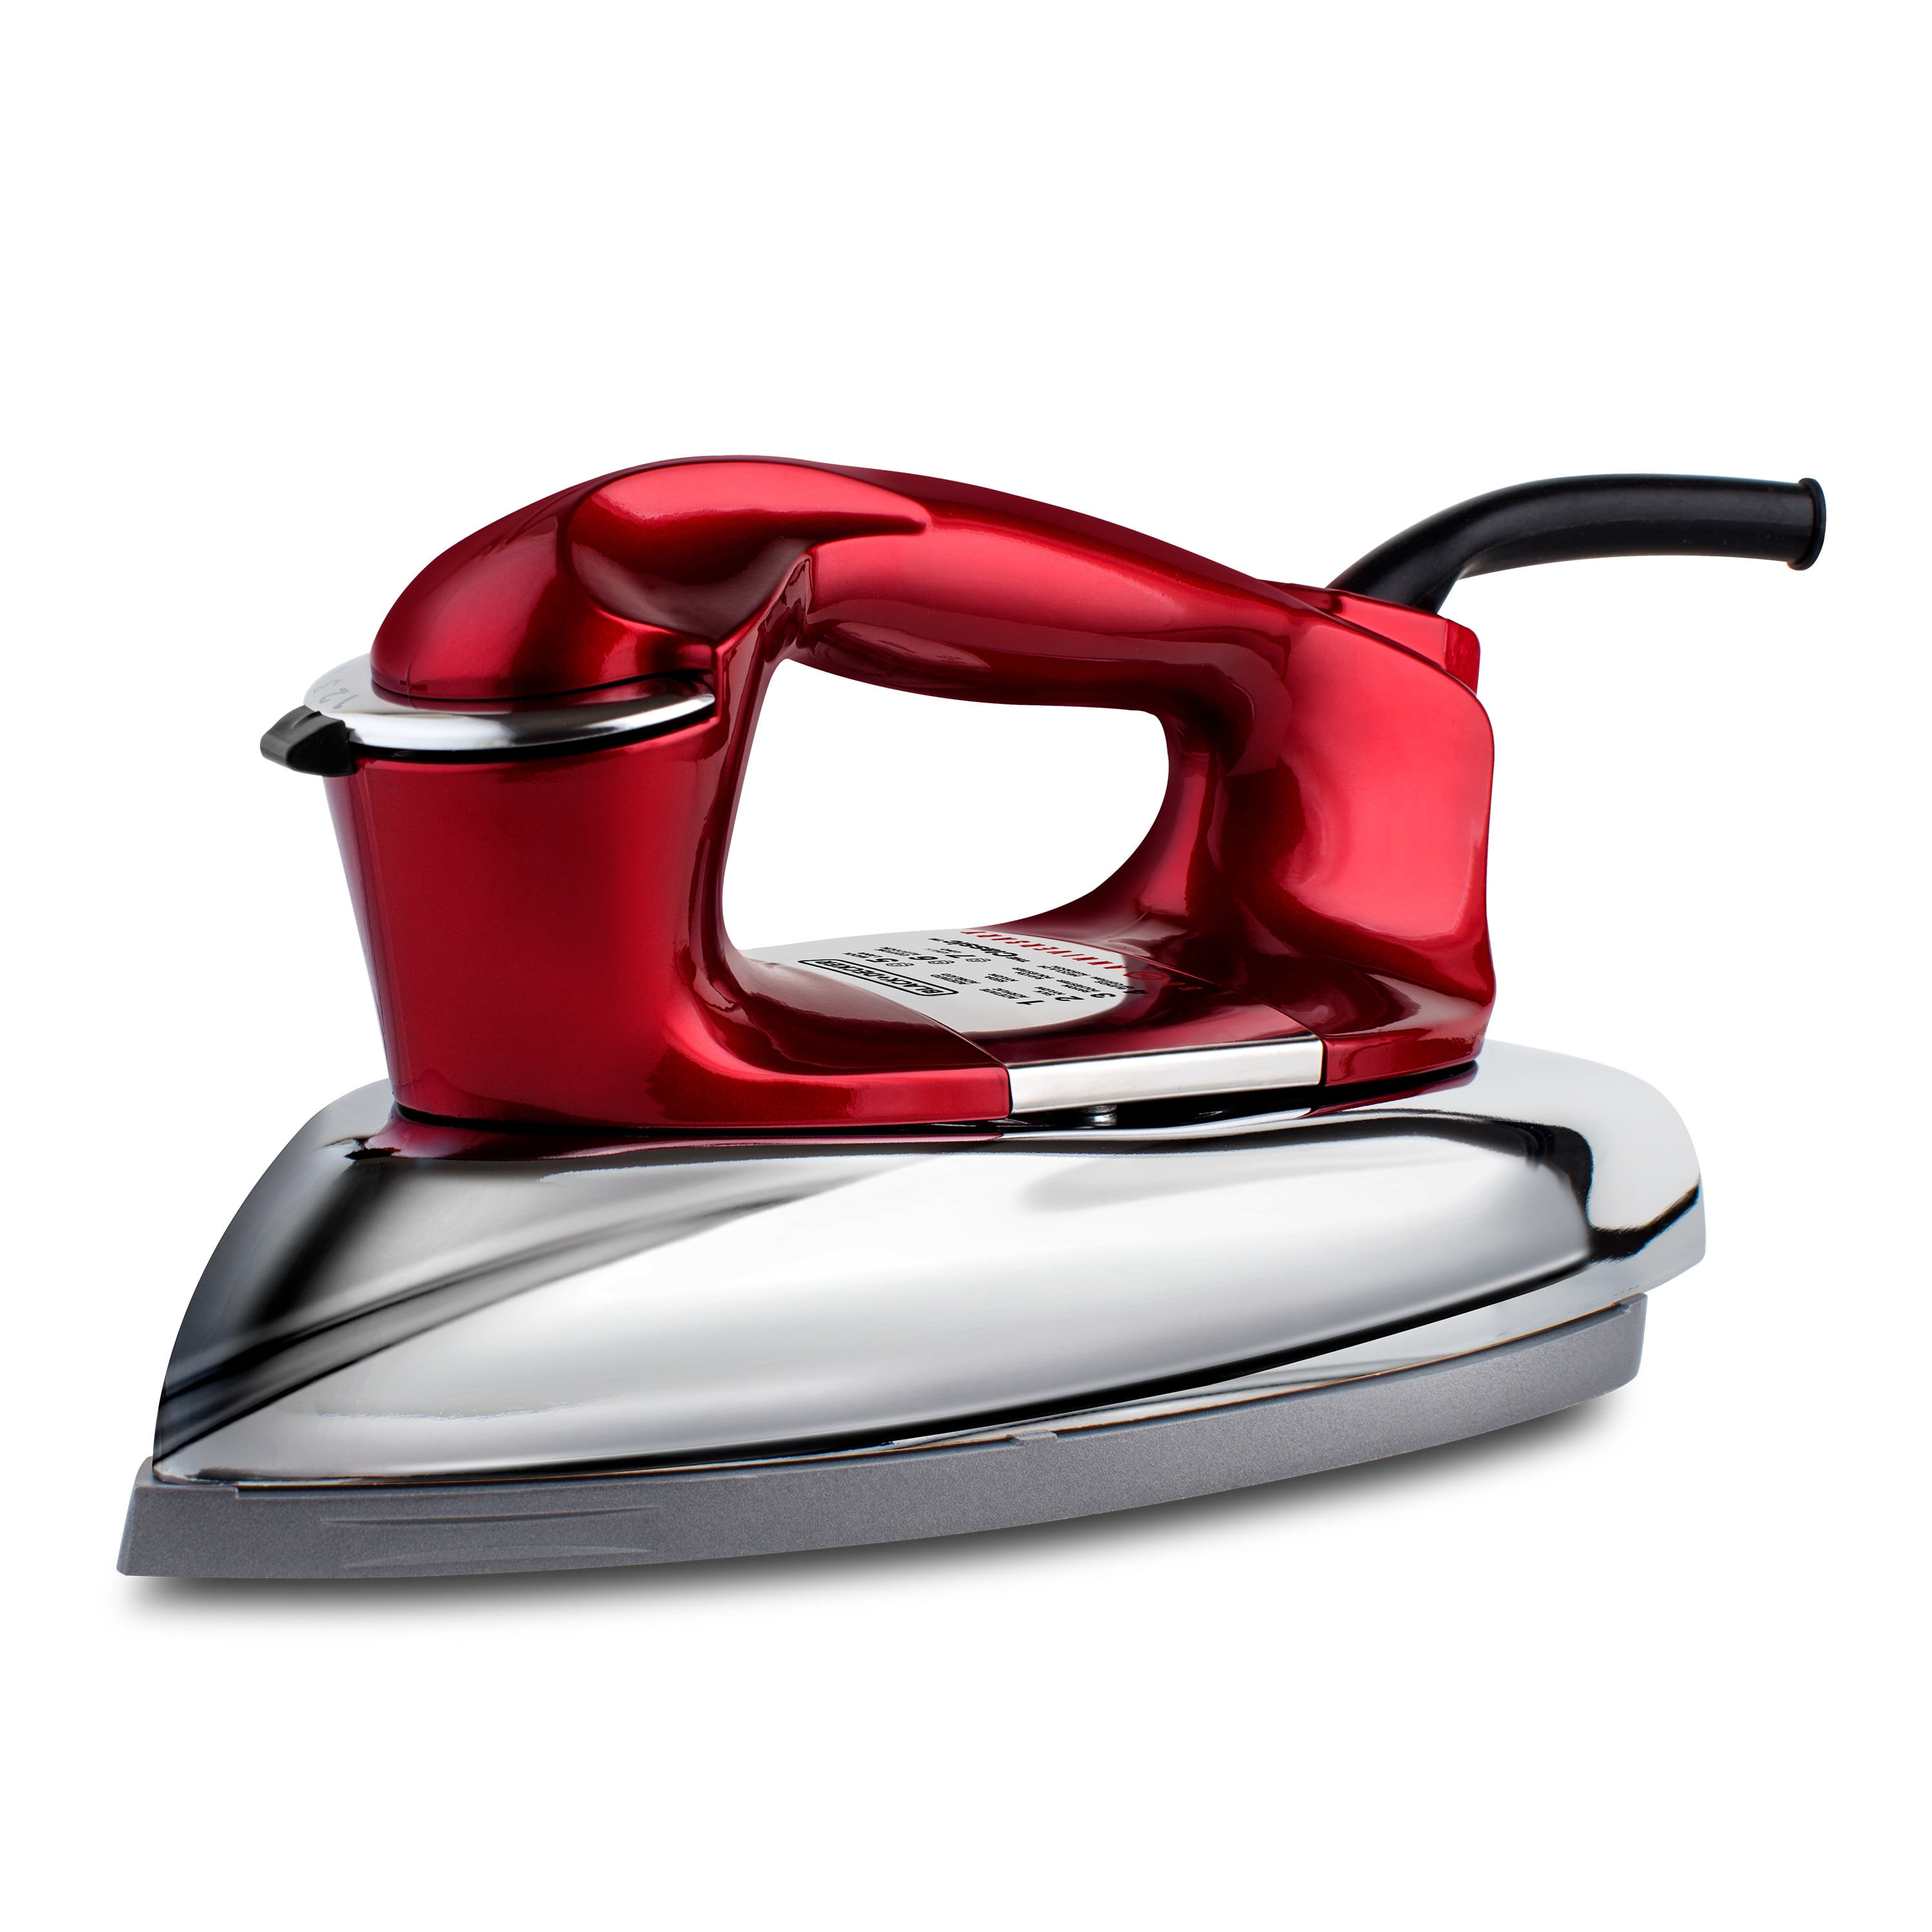 The Classic™ Traditional Steam Iron